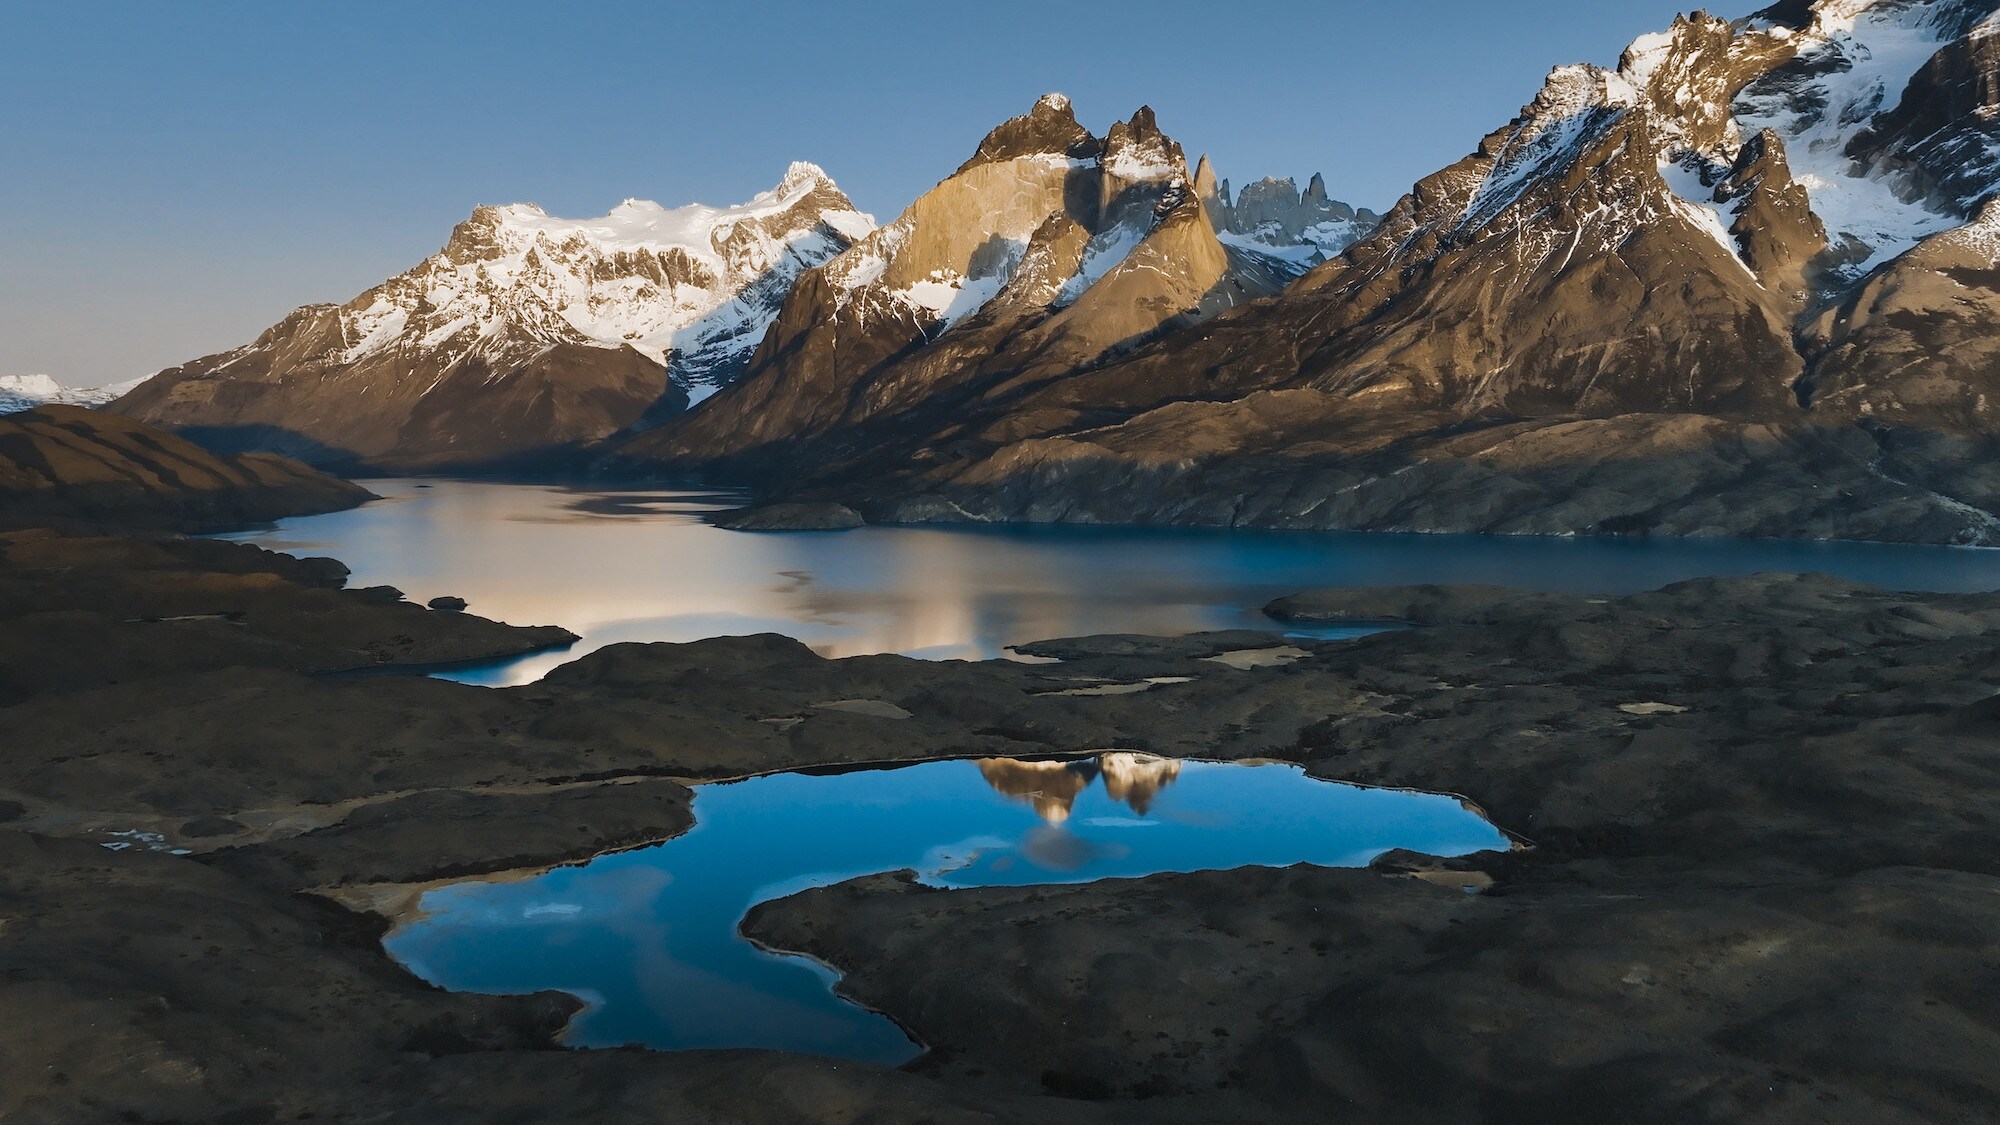 Mountains reflected in the water. (National Geographic for Disney+/Sam Stewart)